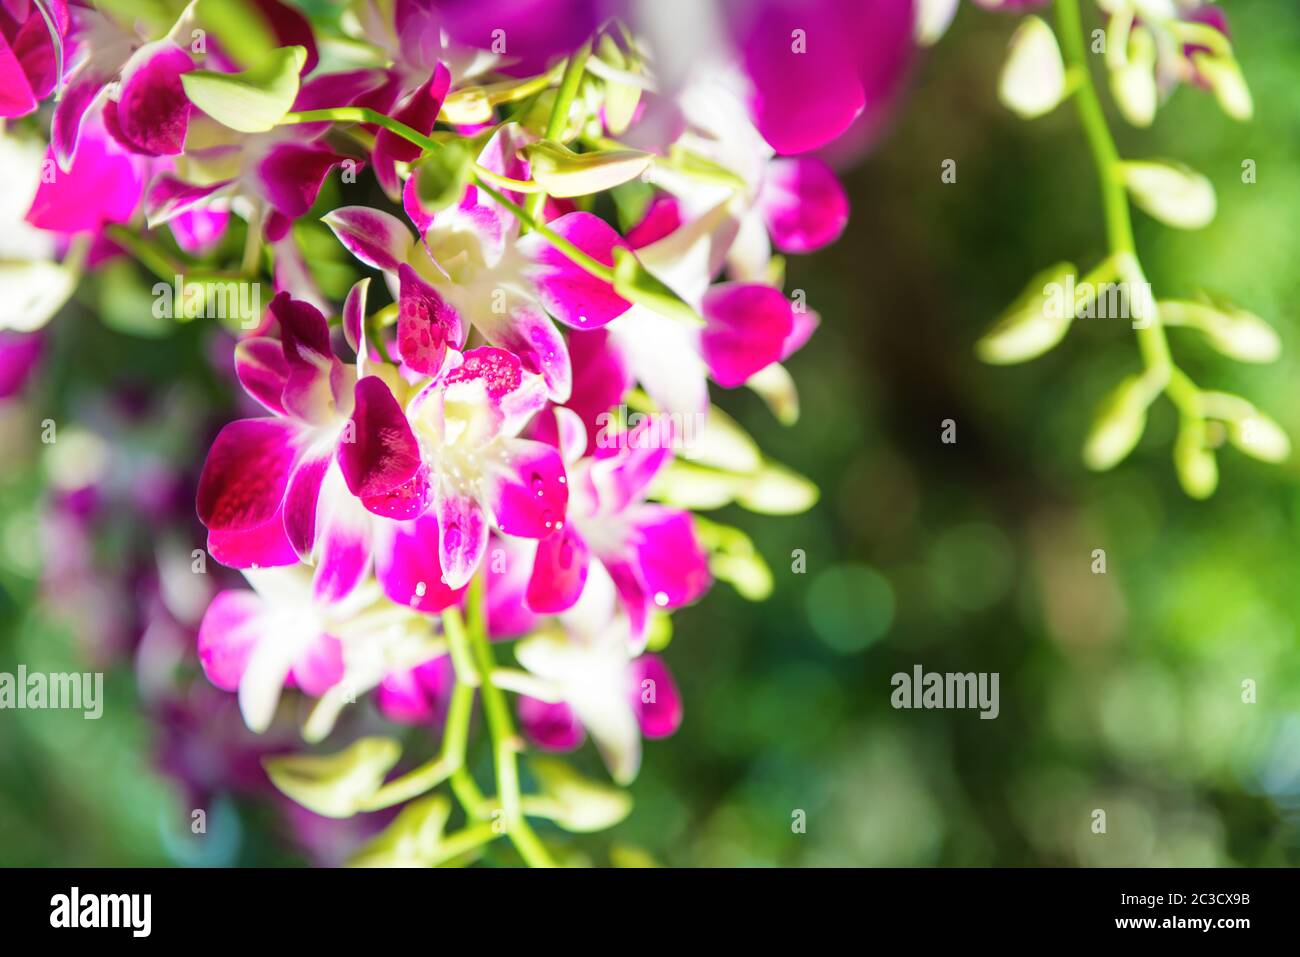 Closeup view of bloom of white, purple and pink tropical orchid flowers Stock Photo